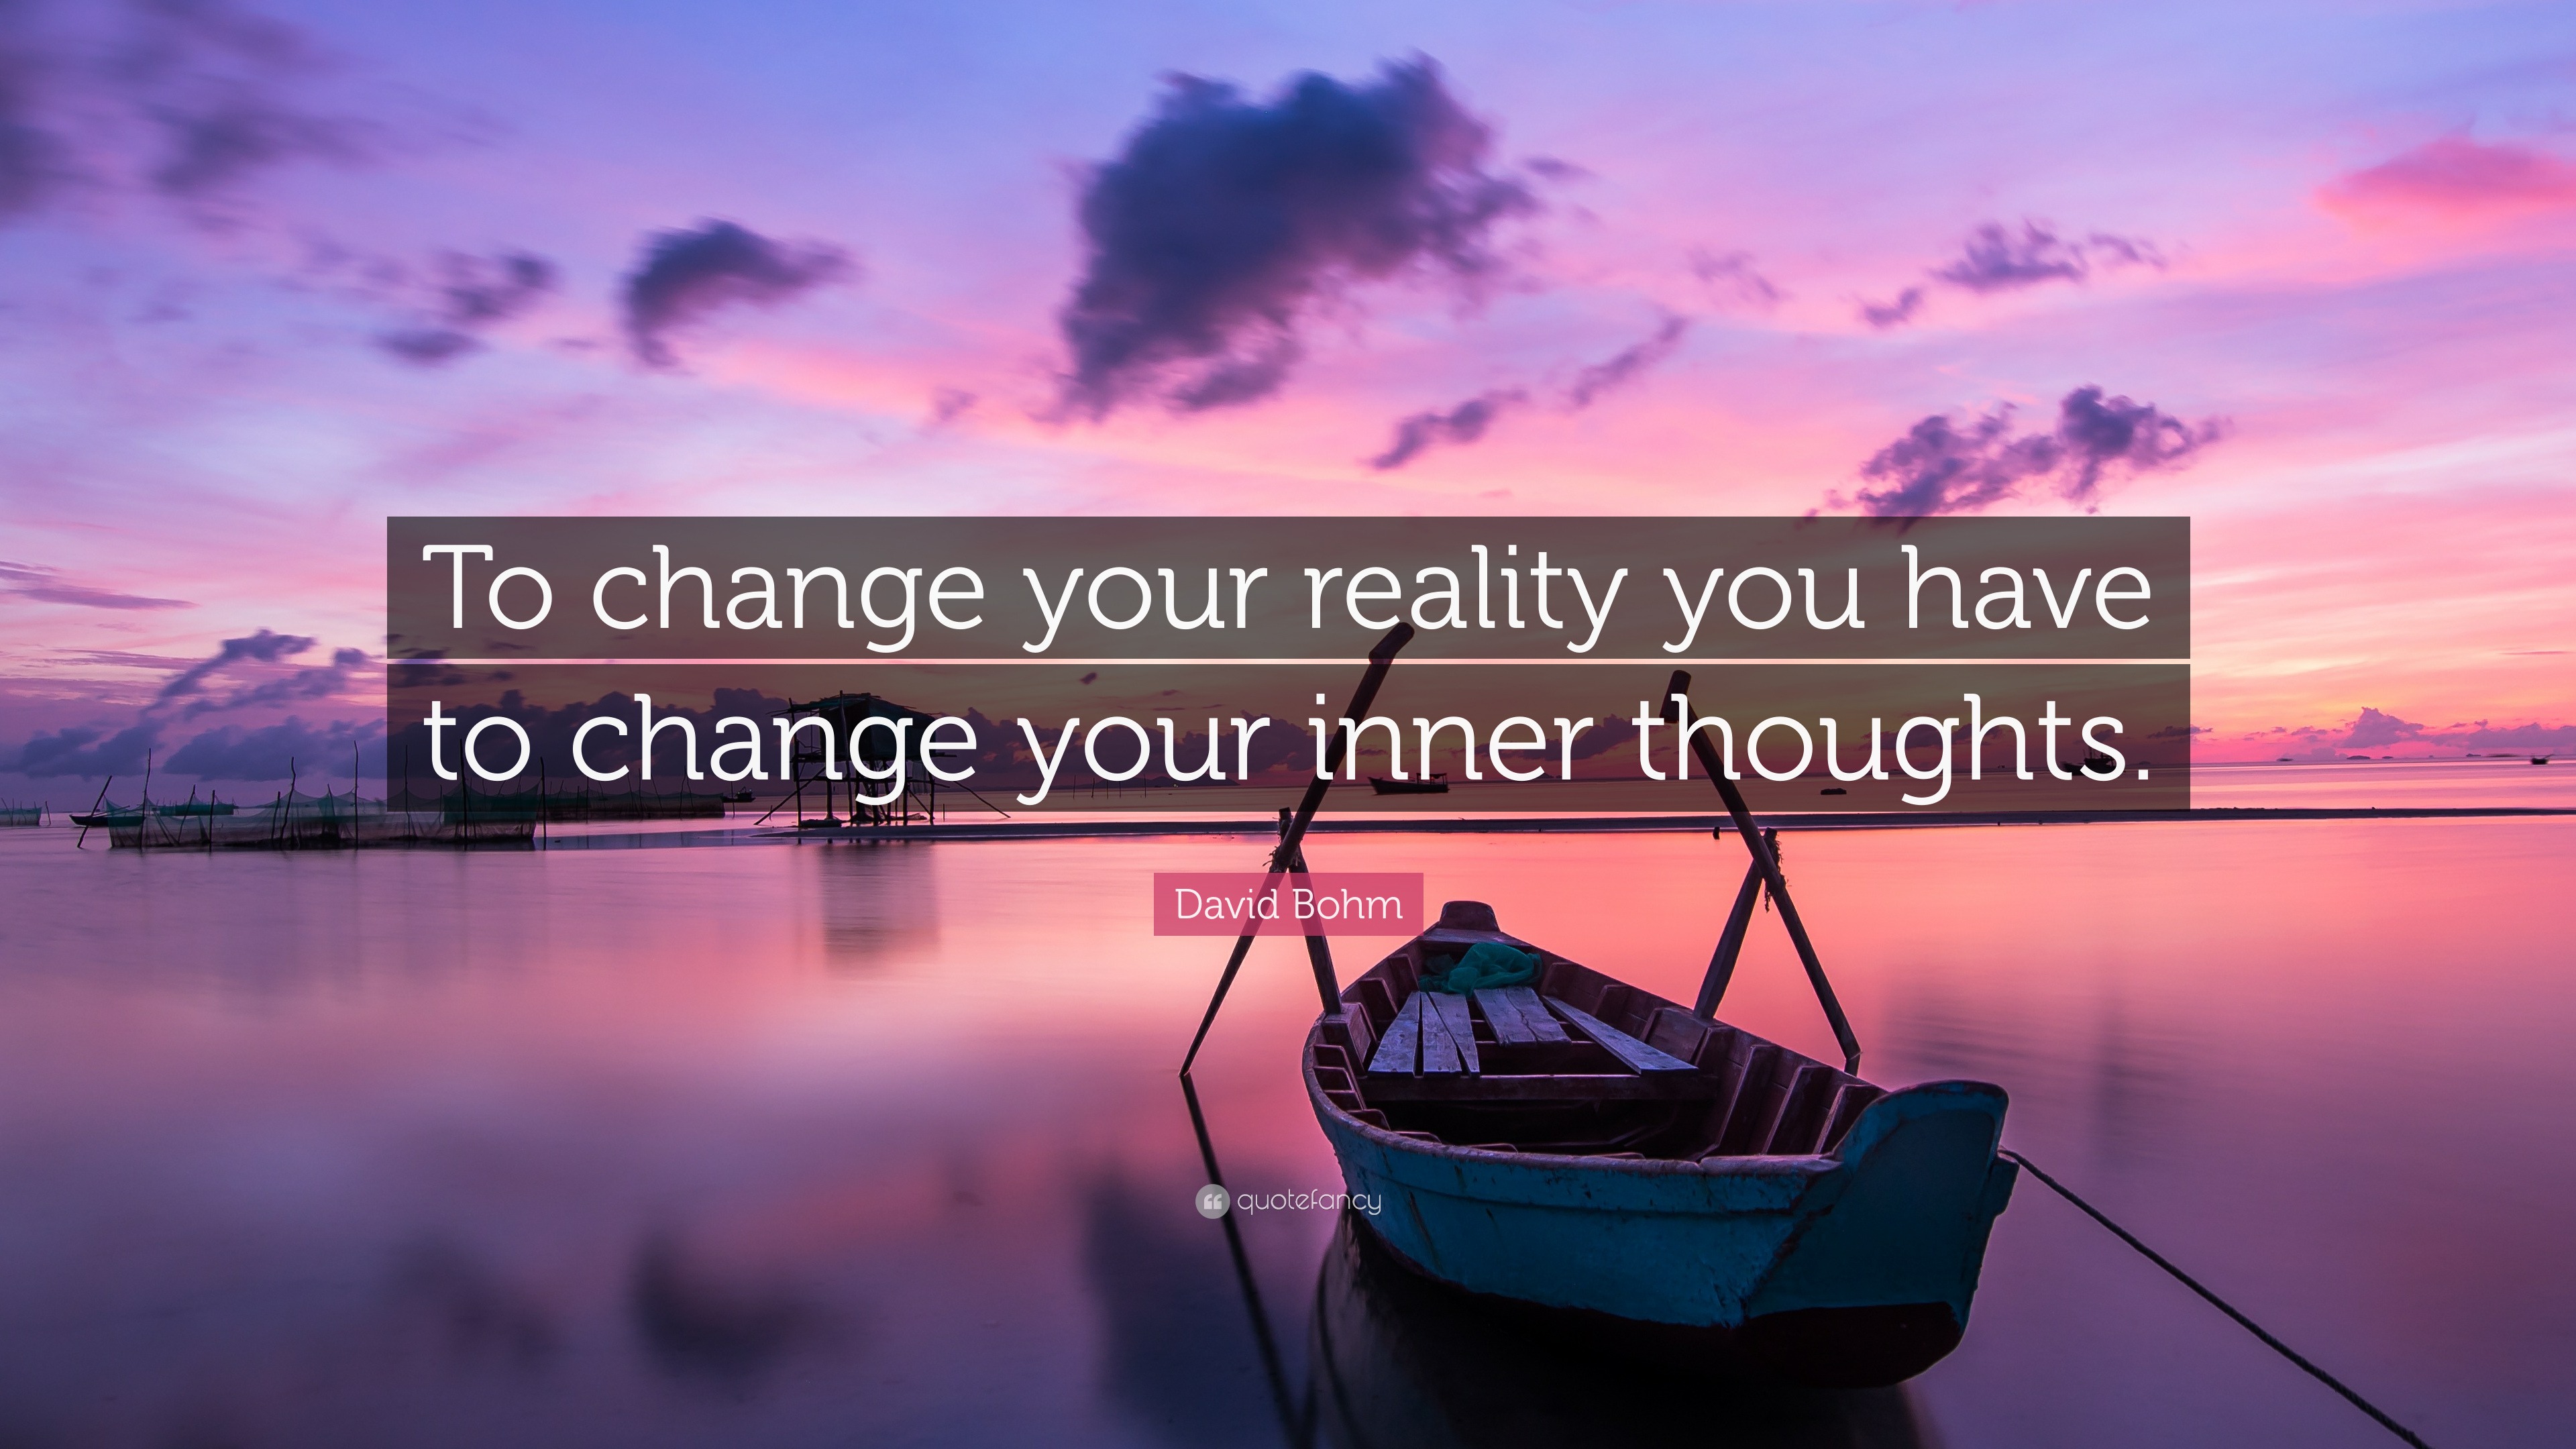 To change your reality you have to change your inner thoughts. 